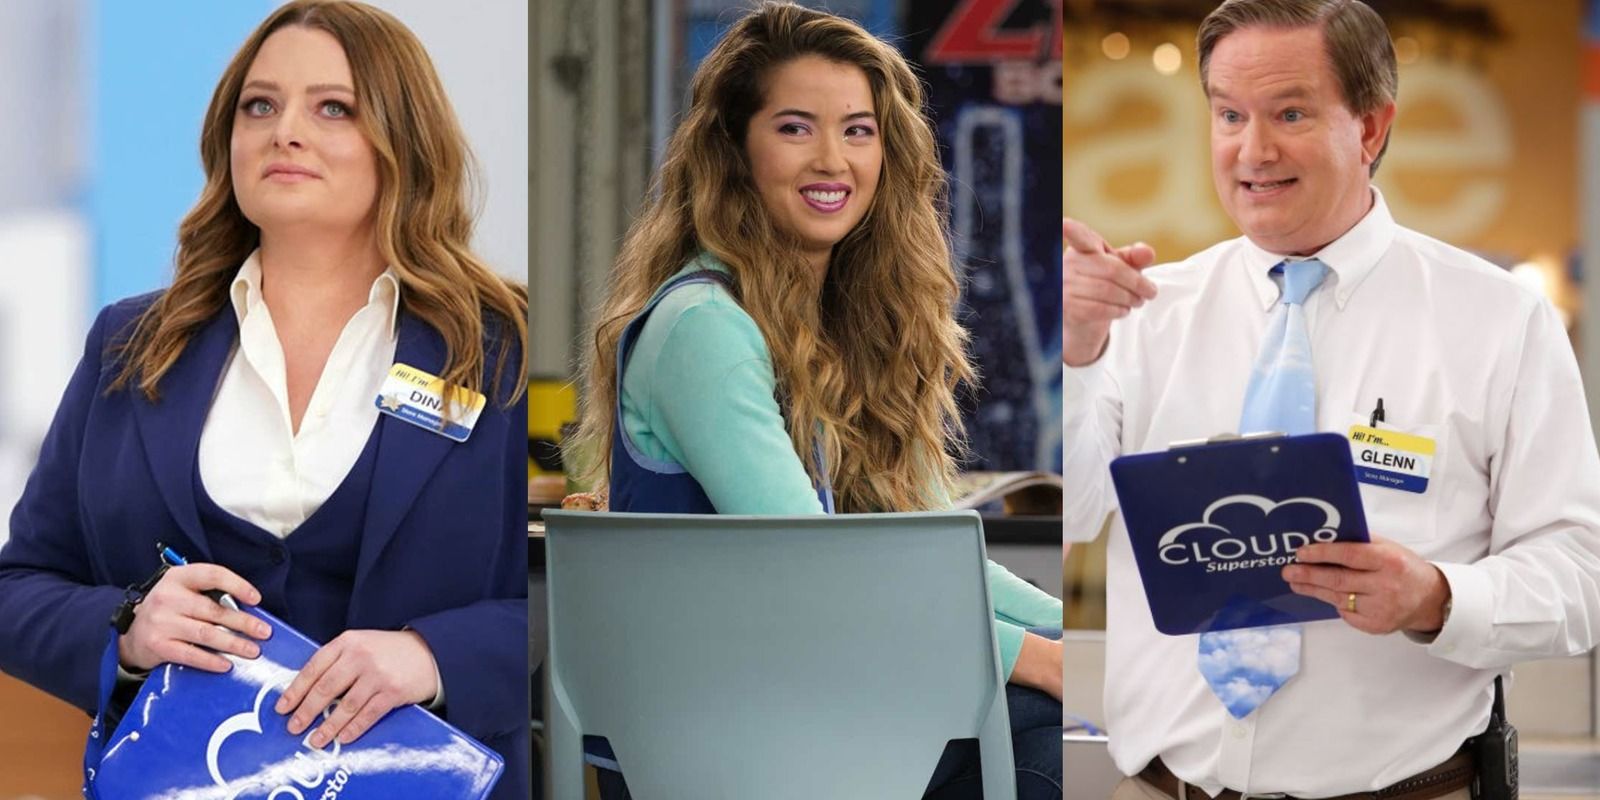 Superstore: Every Character Ranked From Least To Most Likely To Die In A Horror Movie